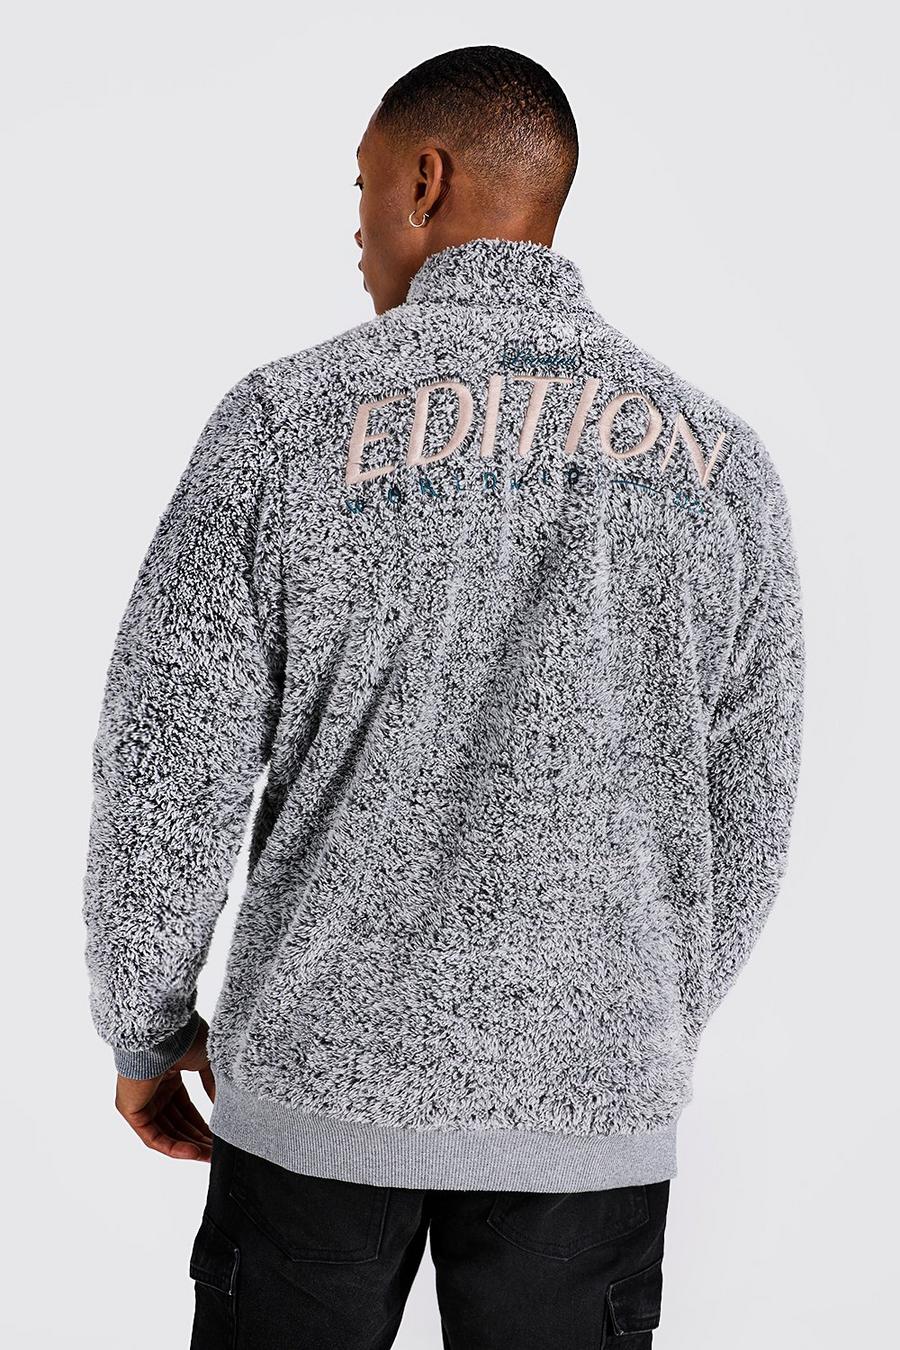 Grey marl Edition Back Embroidered Half Zip Borg Top image number 1